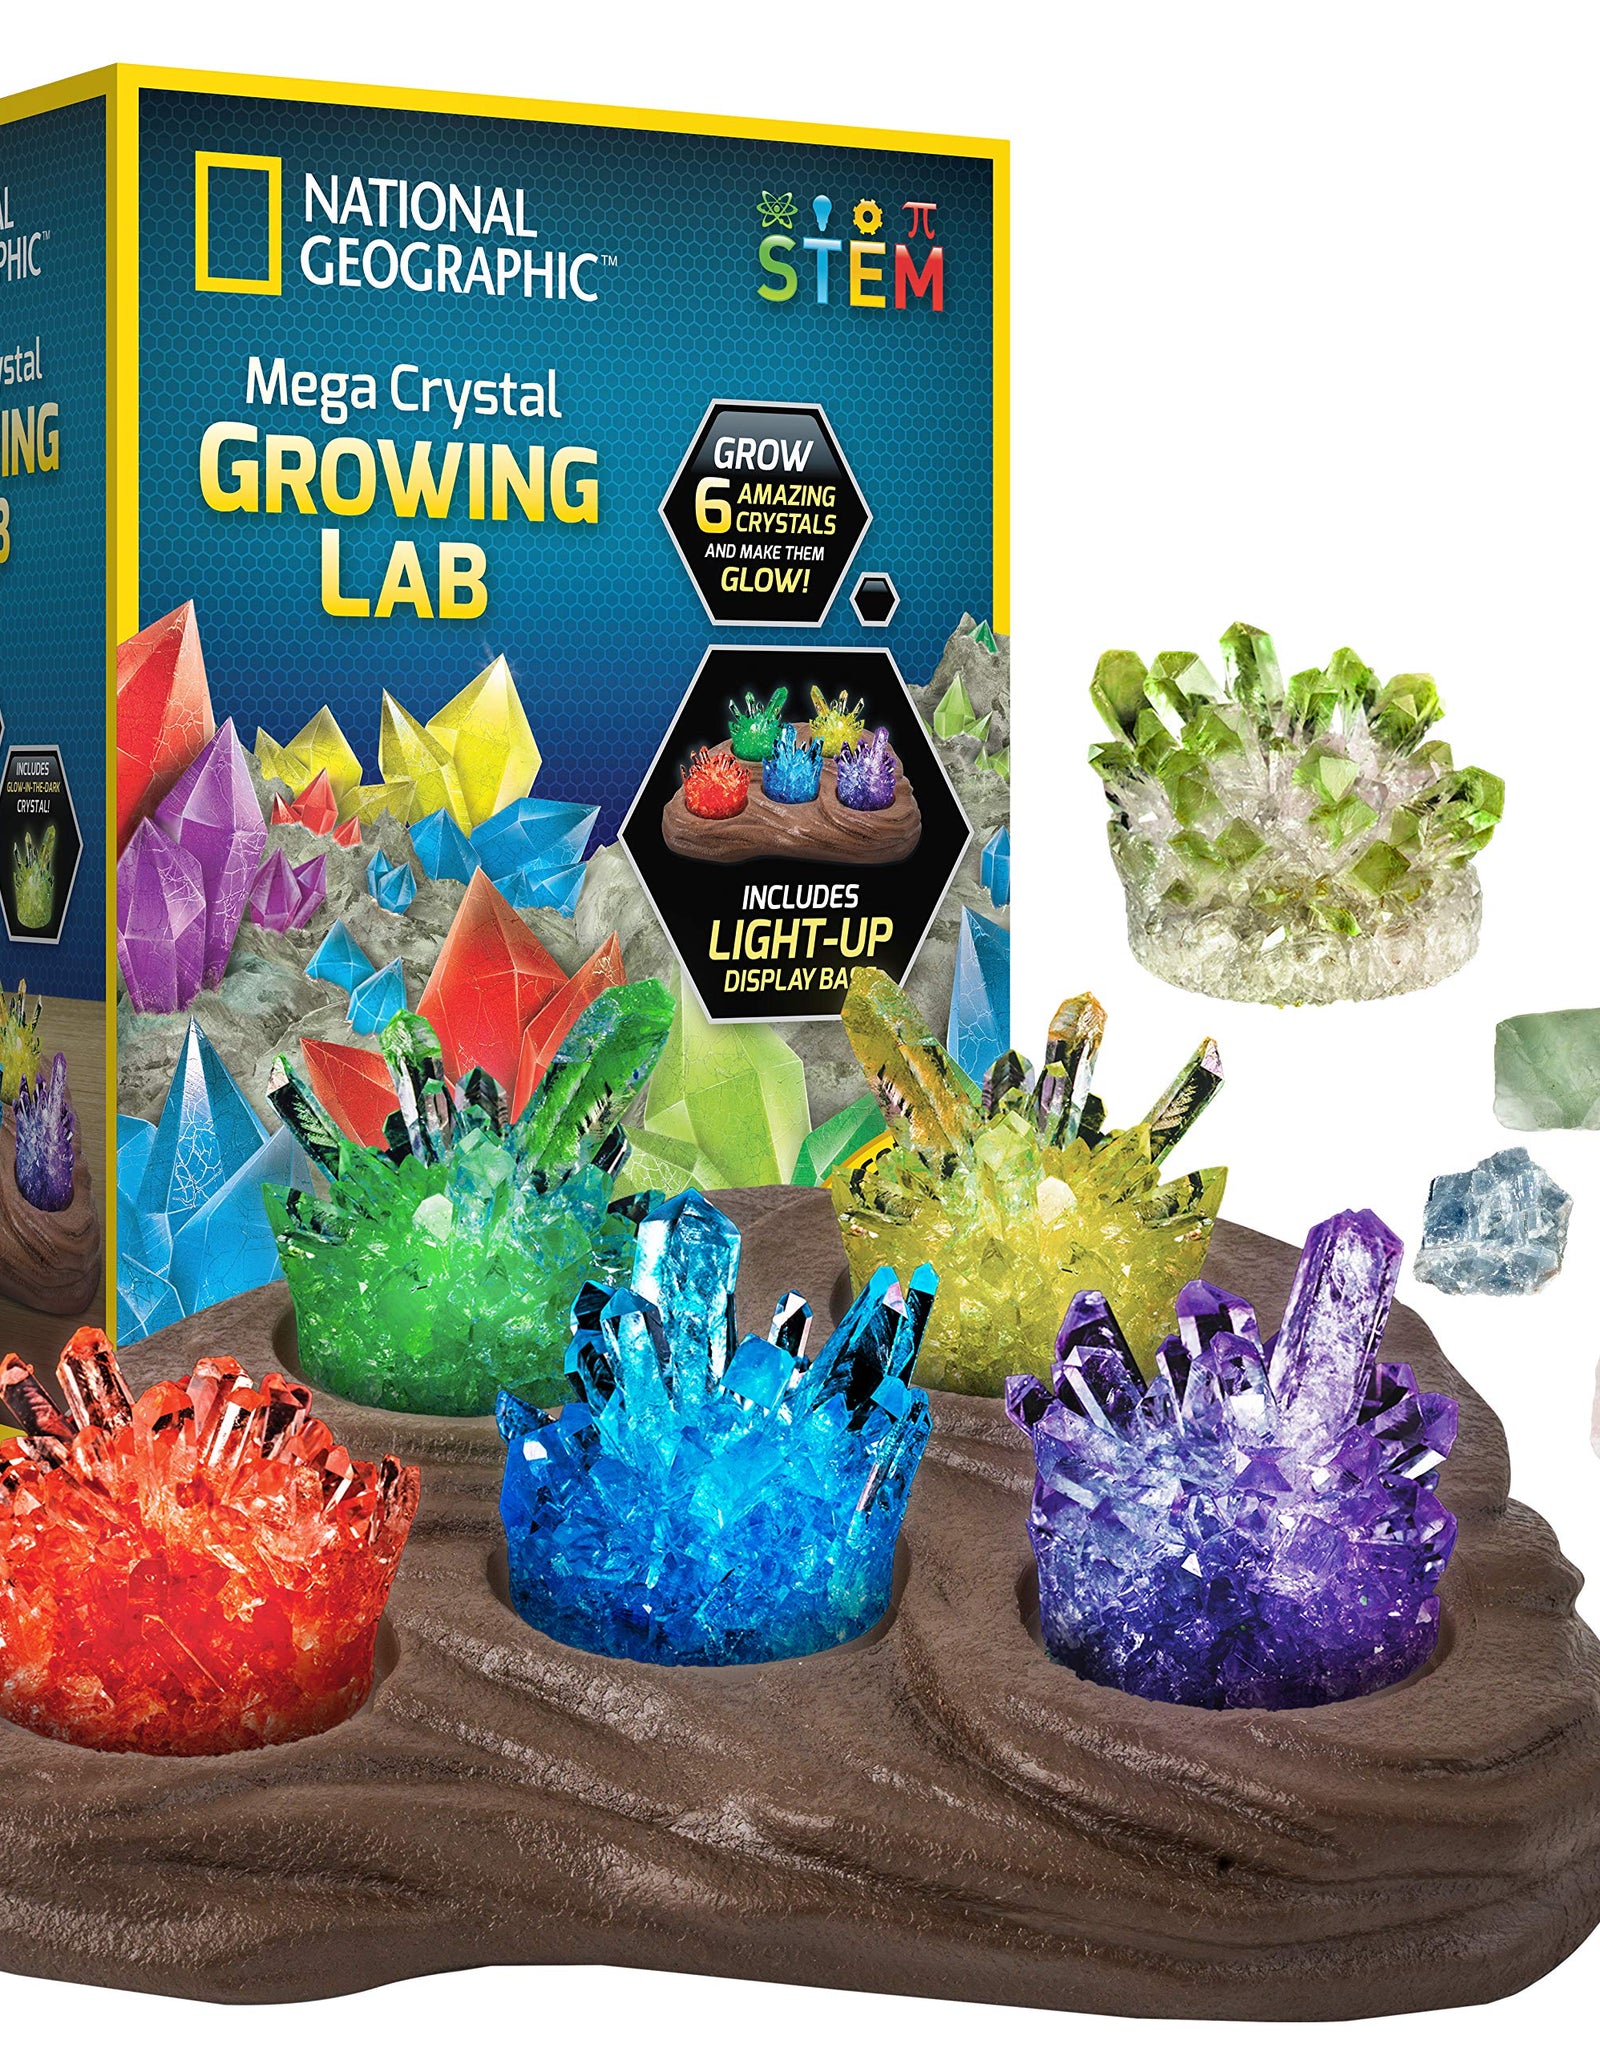 NATIONAL GEOGRAPHIC Mega Crystal Growing Lab – Grow 6 Vibrant Crystals Fast (3-4 Days), with Light-Up Display Stand, Learning Guide, & 4 Genuine Crystal Specimens, an Amazon Exclusive Science Kit